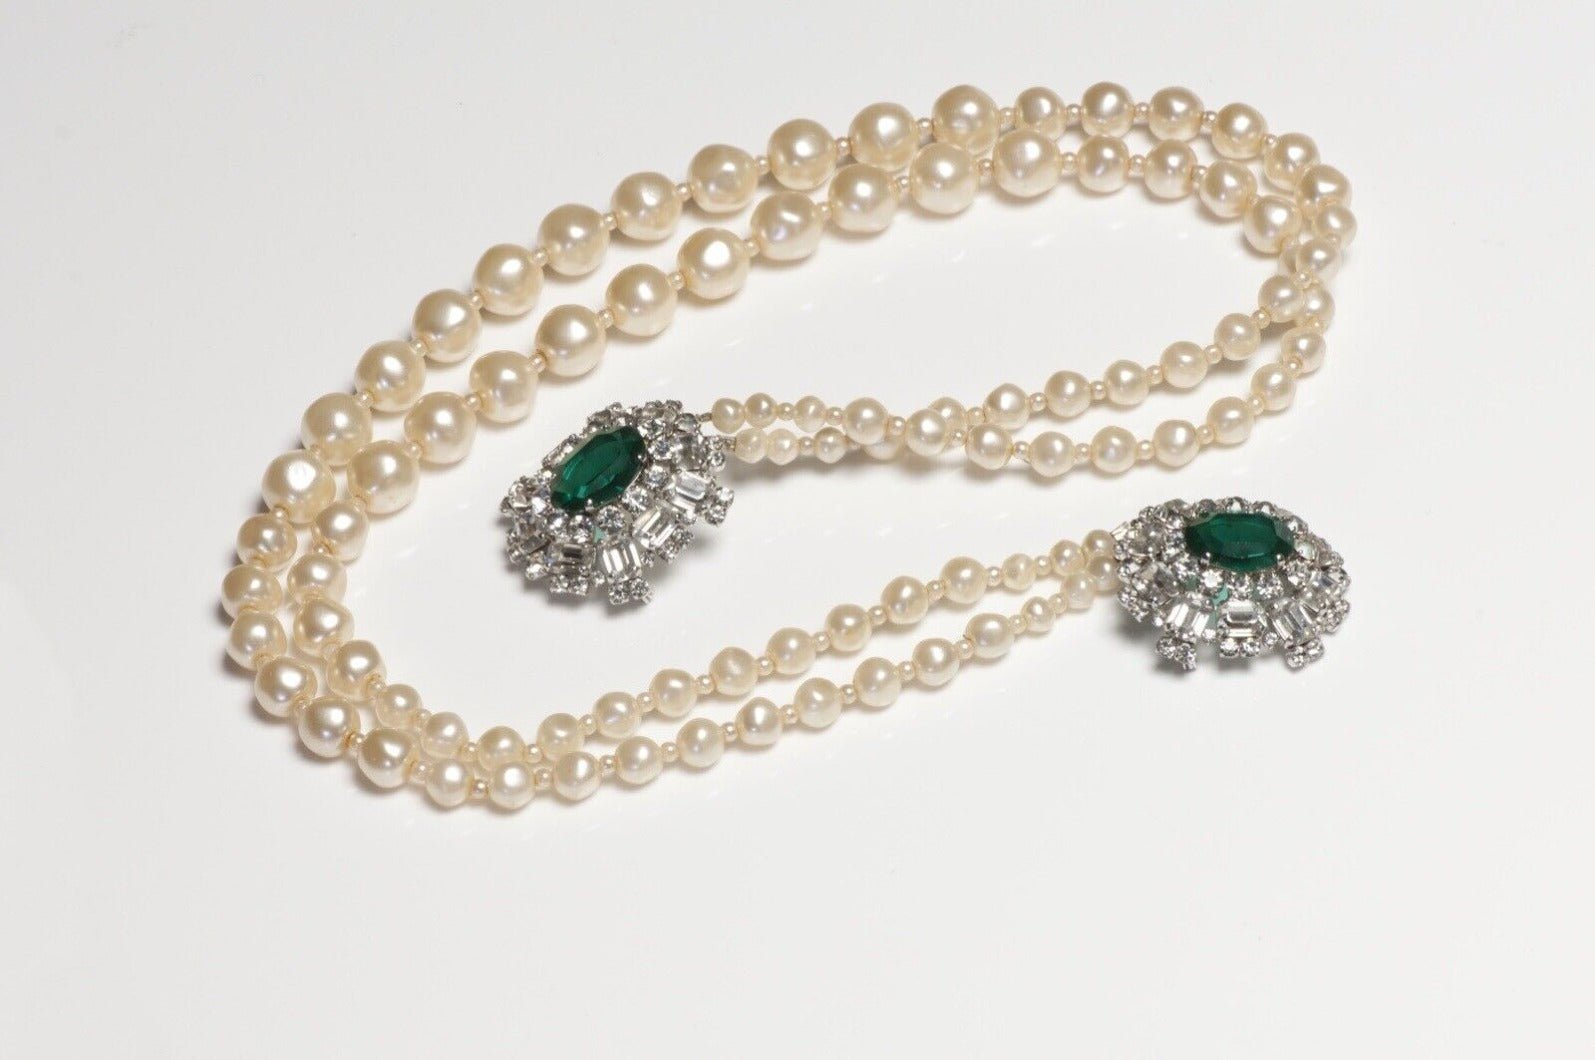 Christian Dior 1961 Marc Bohan Pearl Green Crystal Double Brooch Necklace